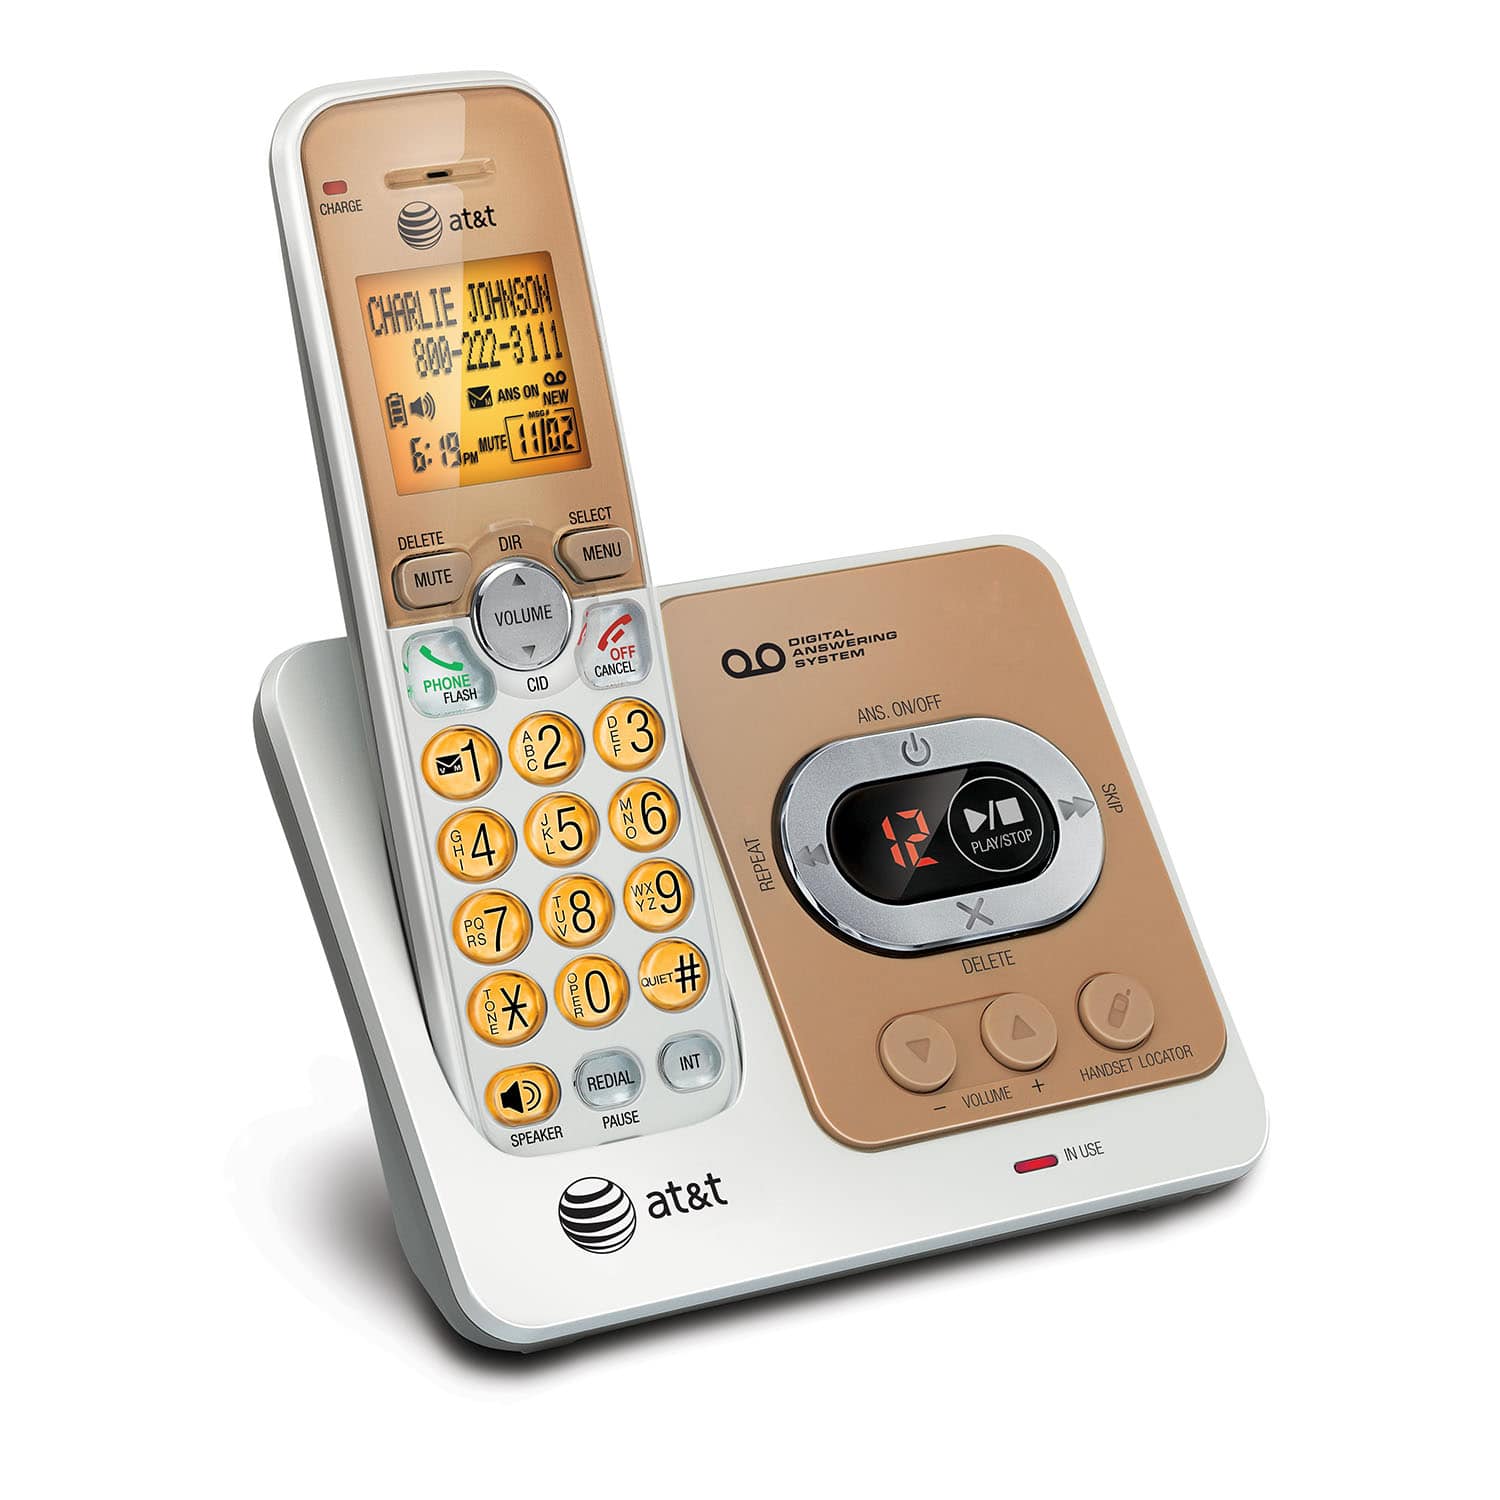 5 handset cordless answering system with caller ID/call waiting - view 3